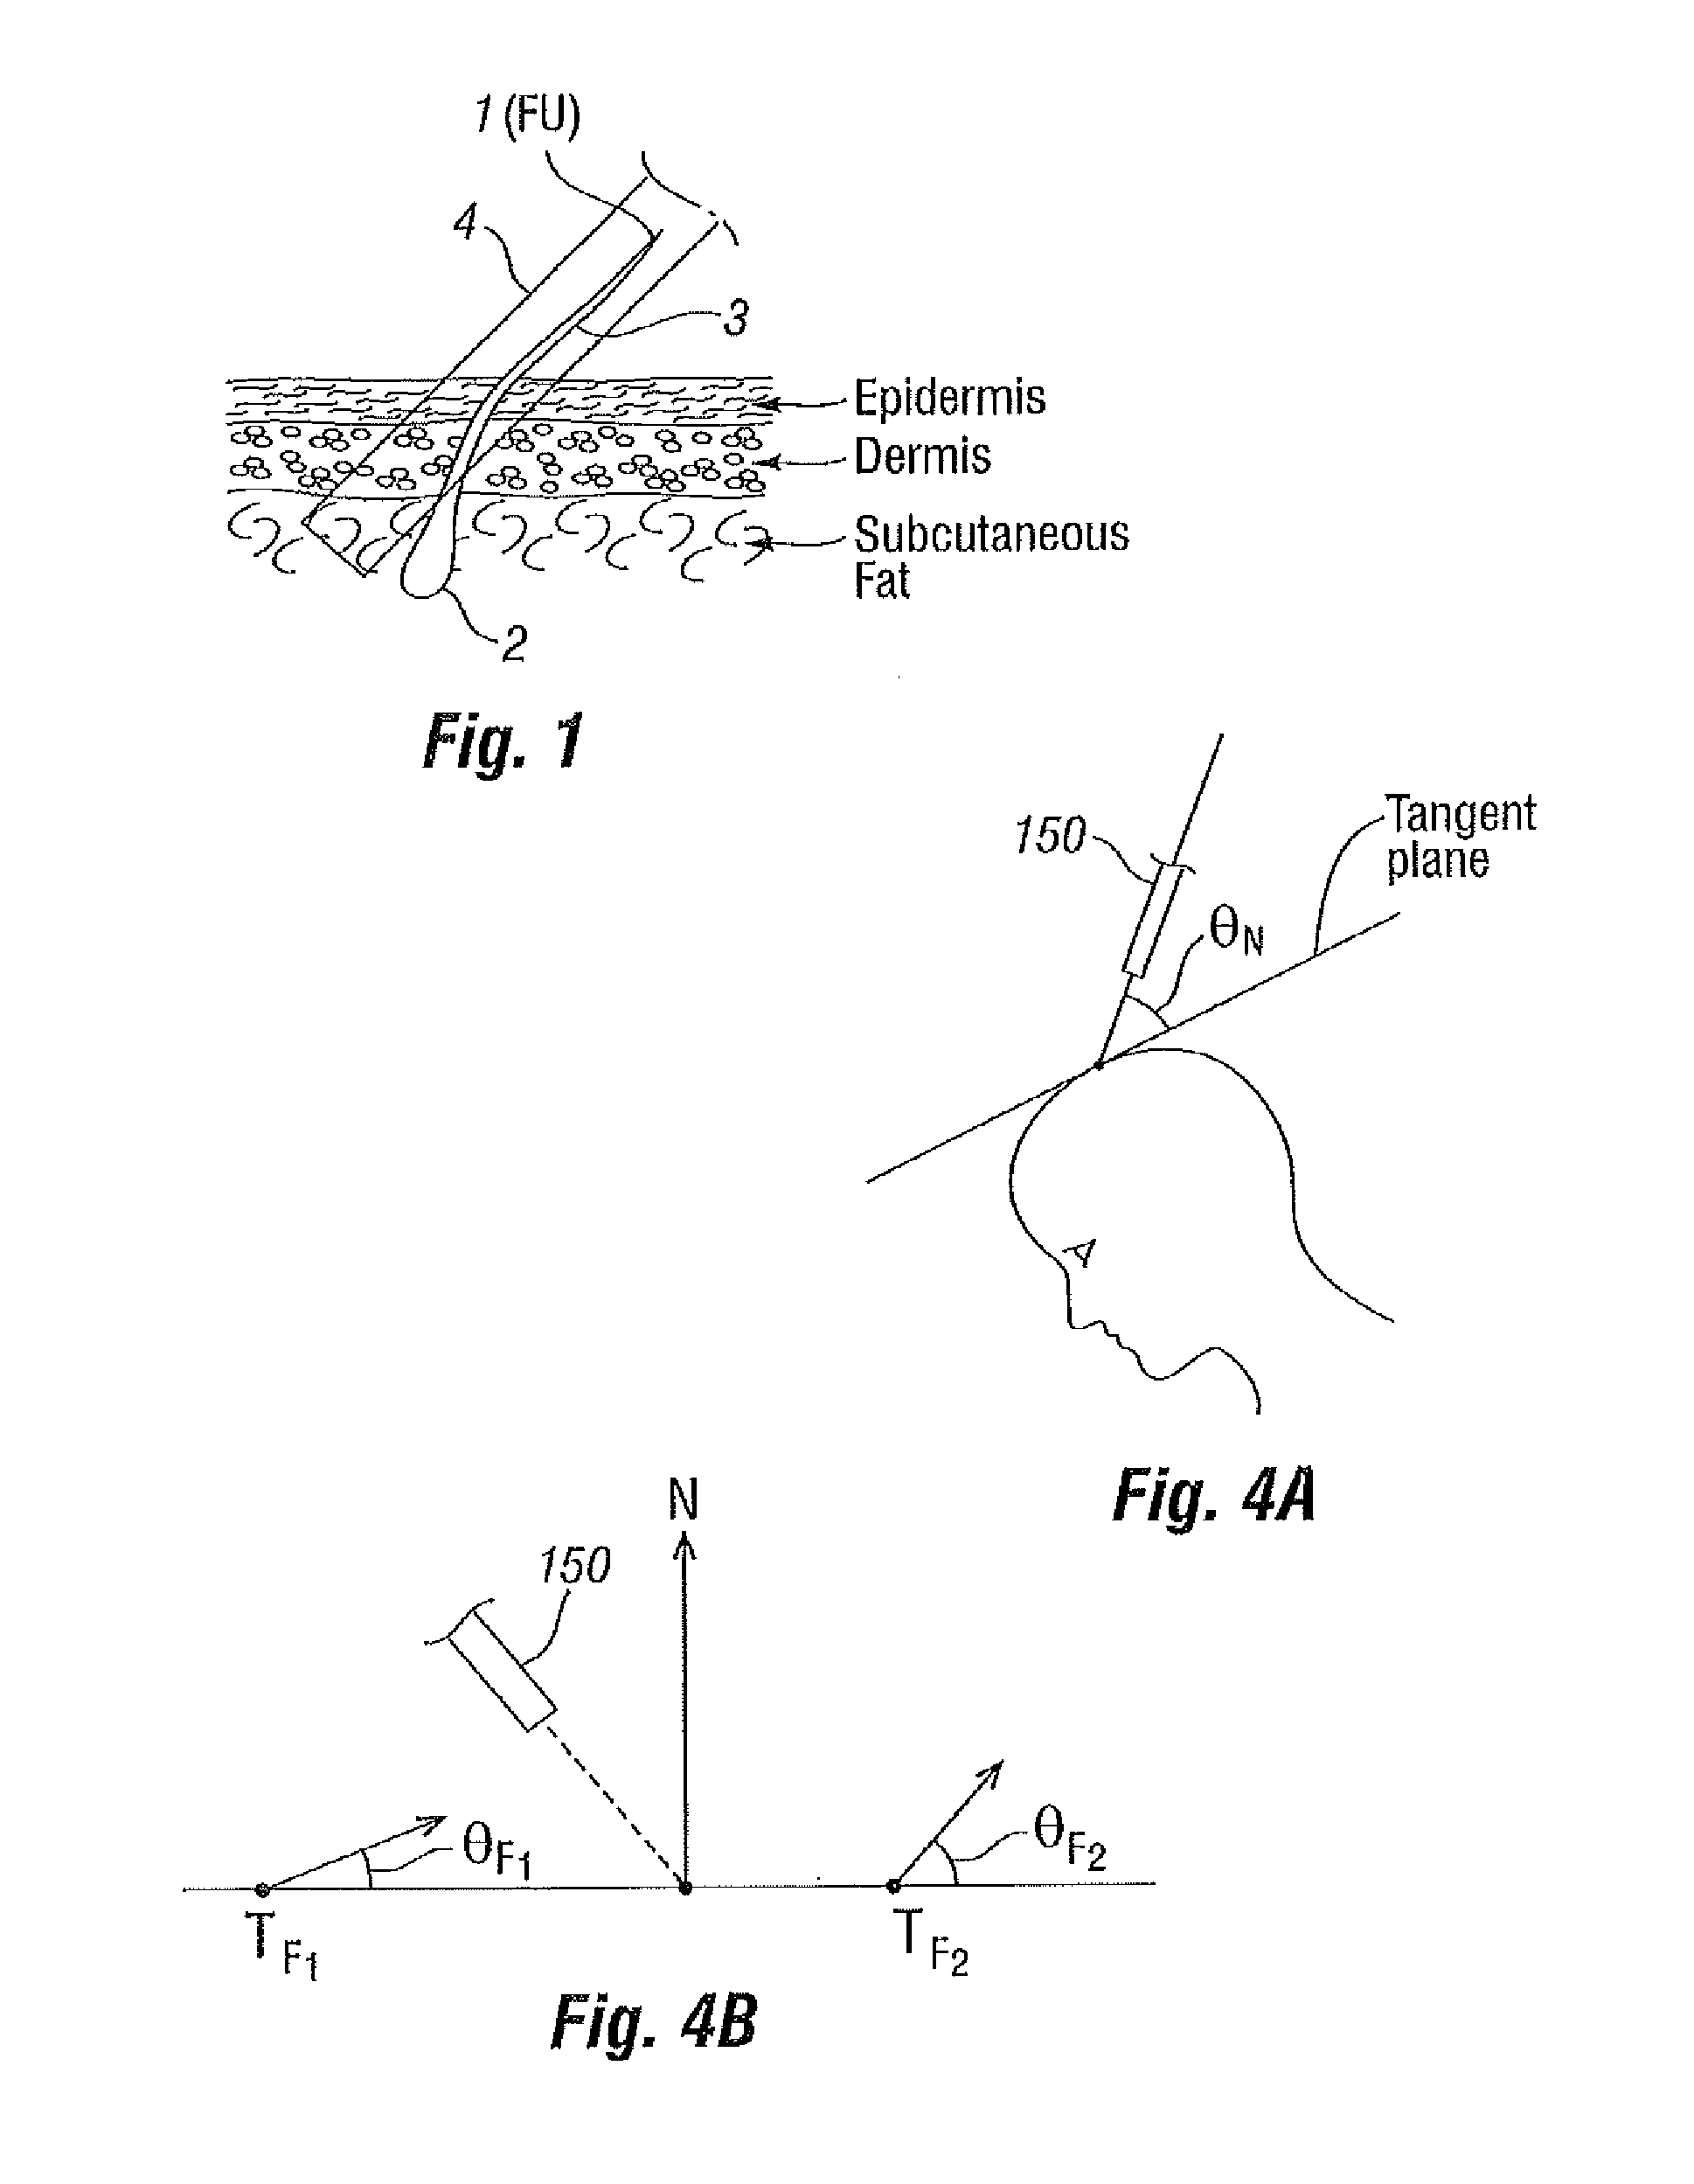 Systems and Methods for Harvesting and Implanting Hair Using Image-Generated Topological Skin Models